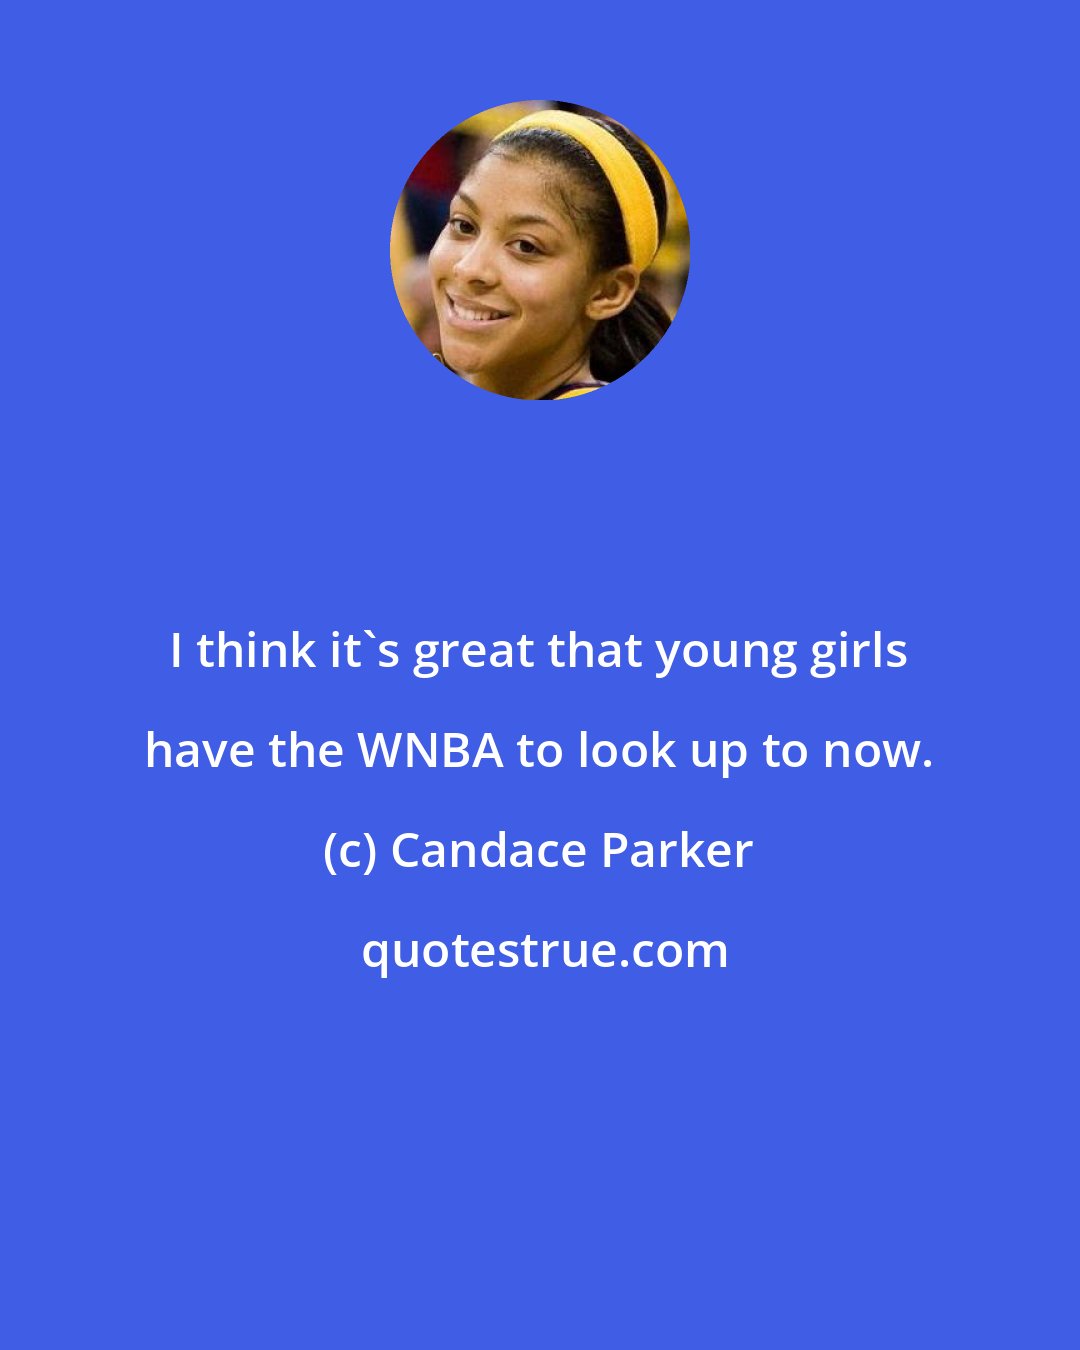 Candace Parker: I think it's great that young girls have the WNBA to look up to now.